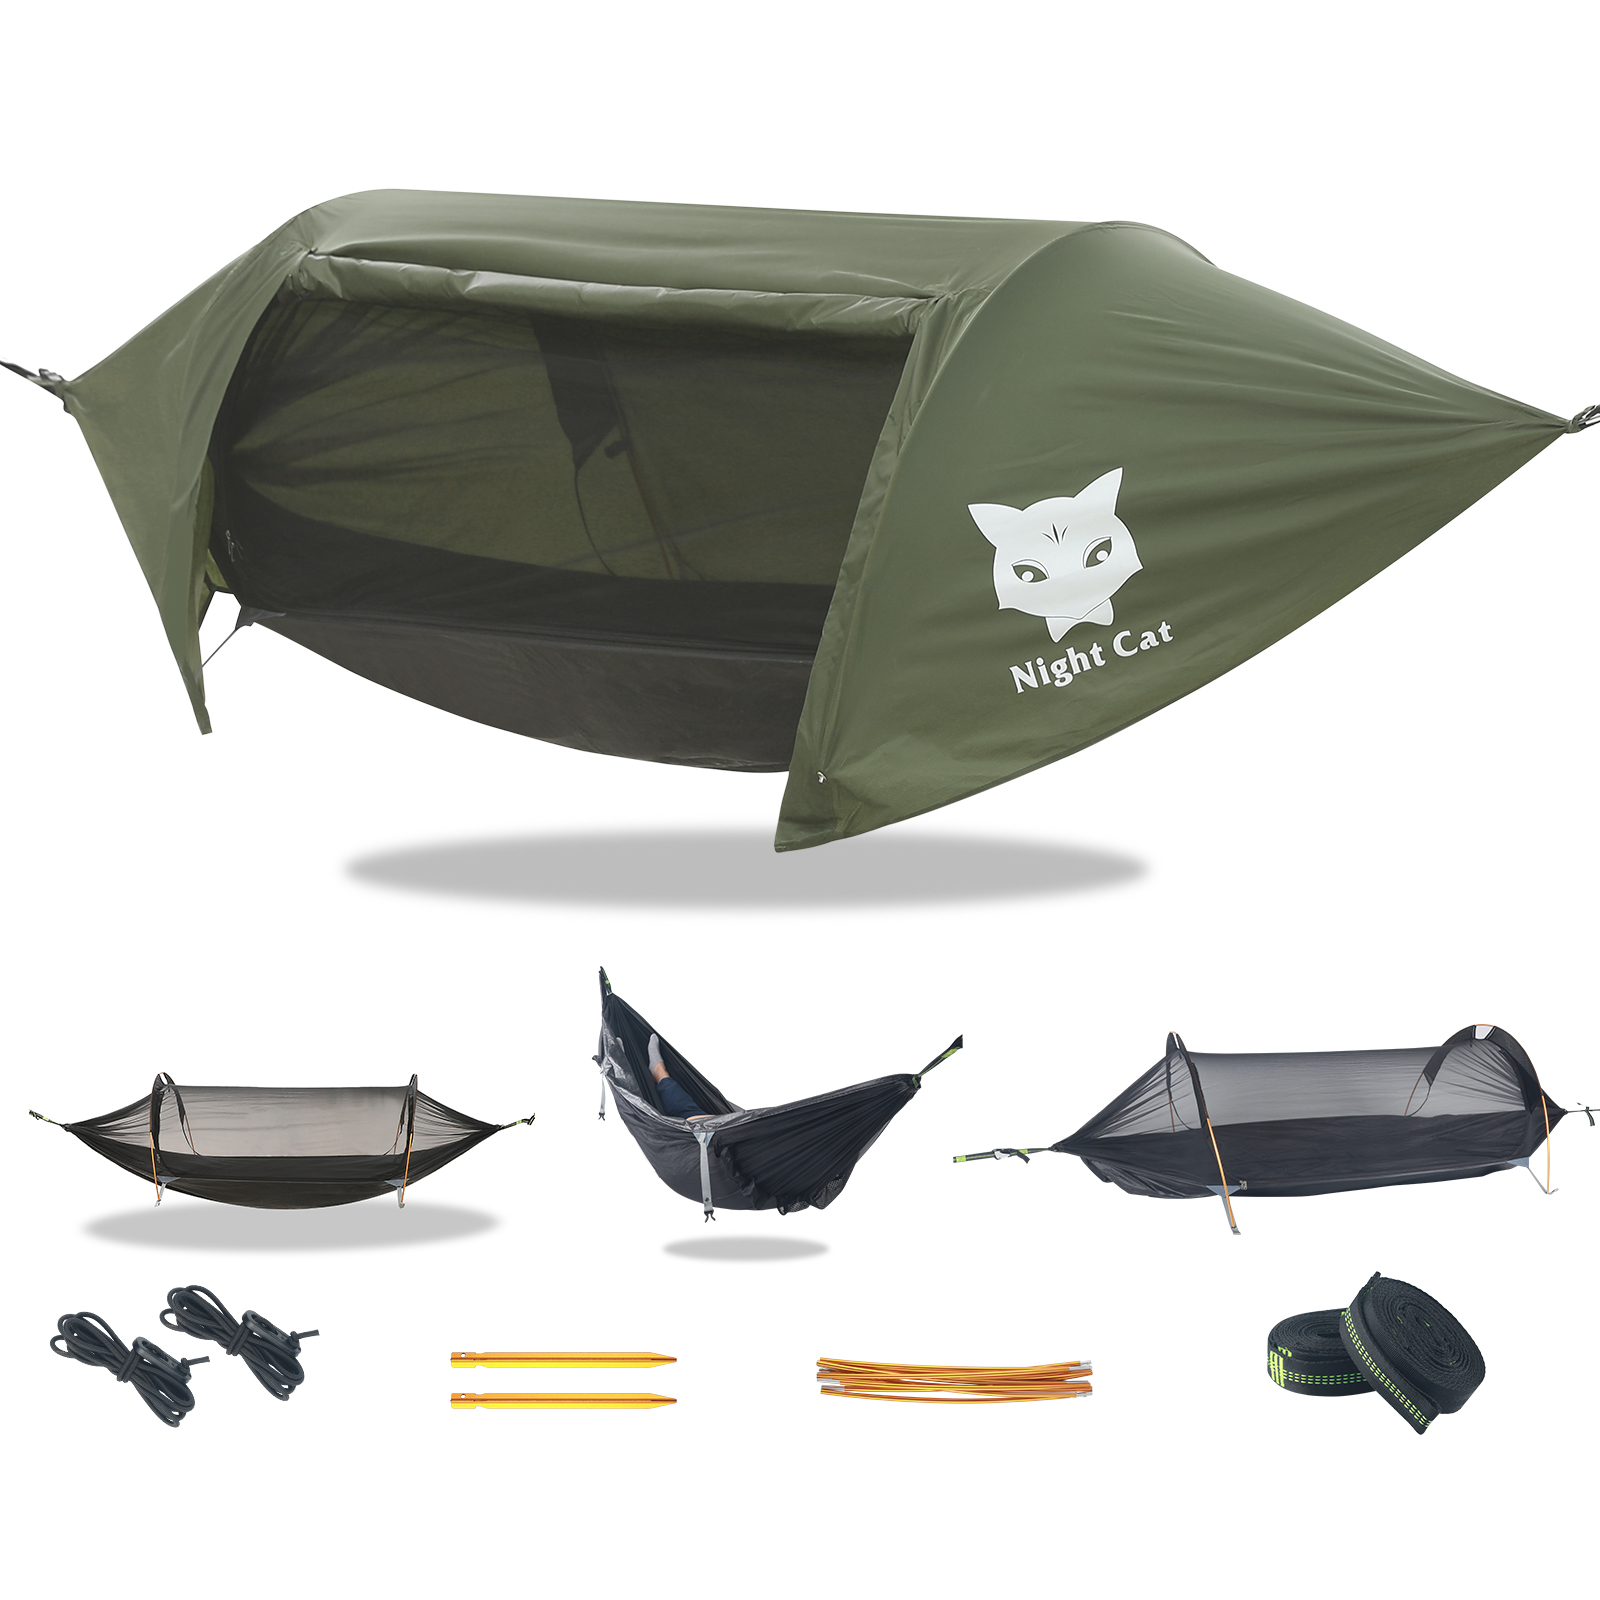 Night Cat Camping Hammock Tent Tree Tent with Mosquito Net and Rain Fly for One Person